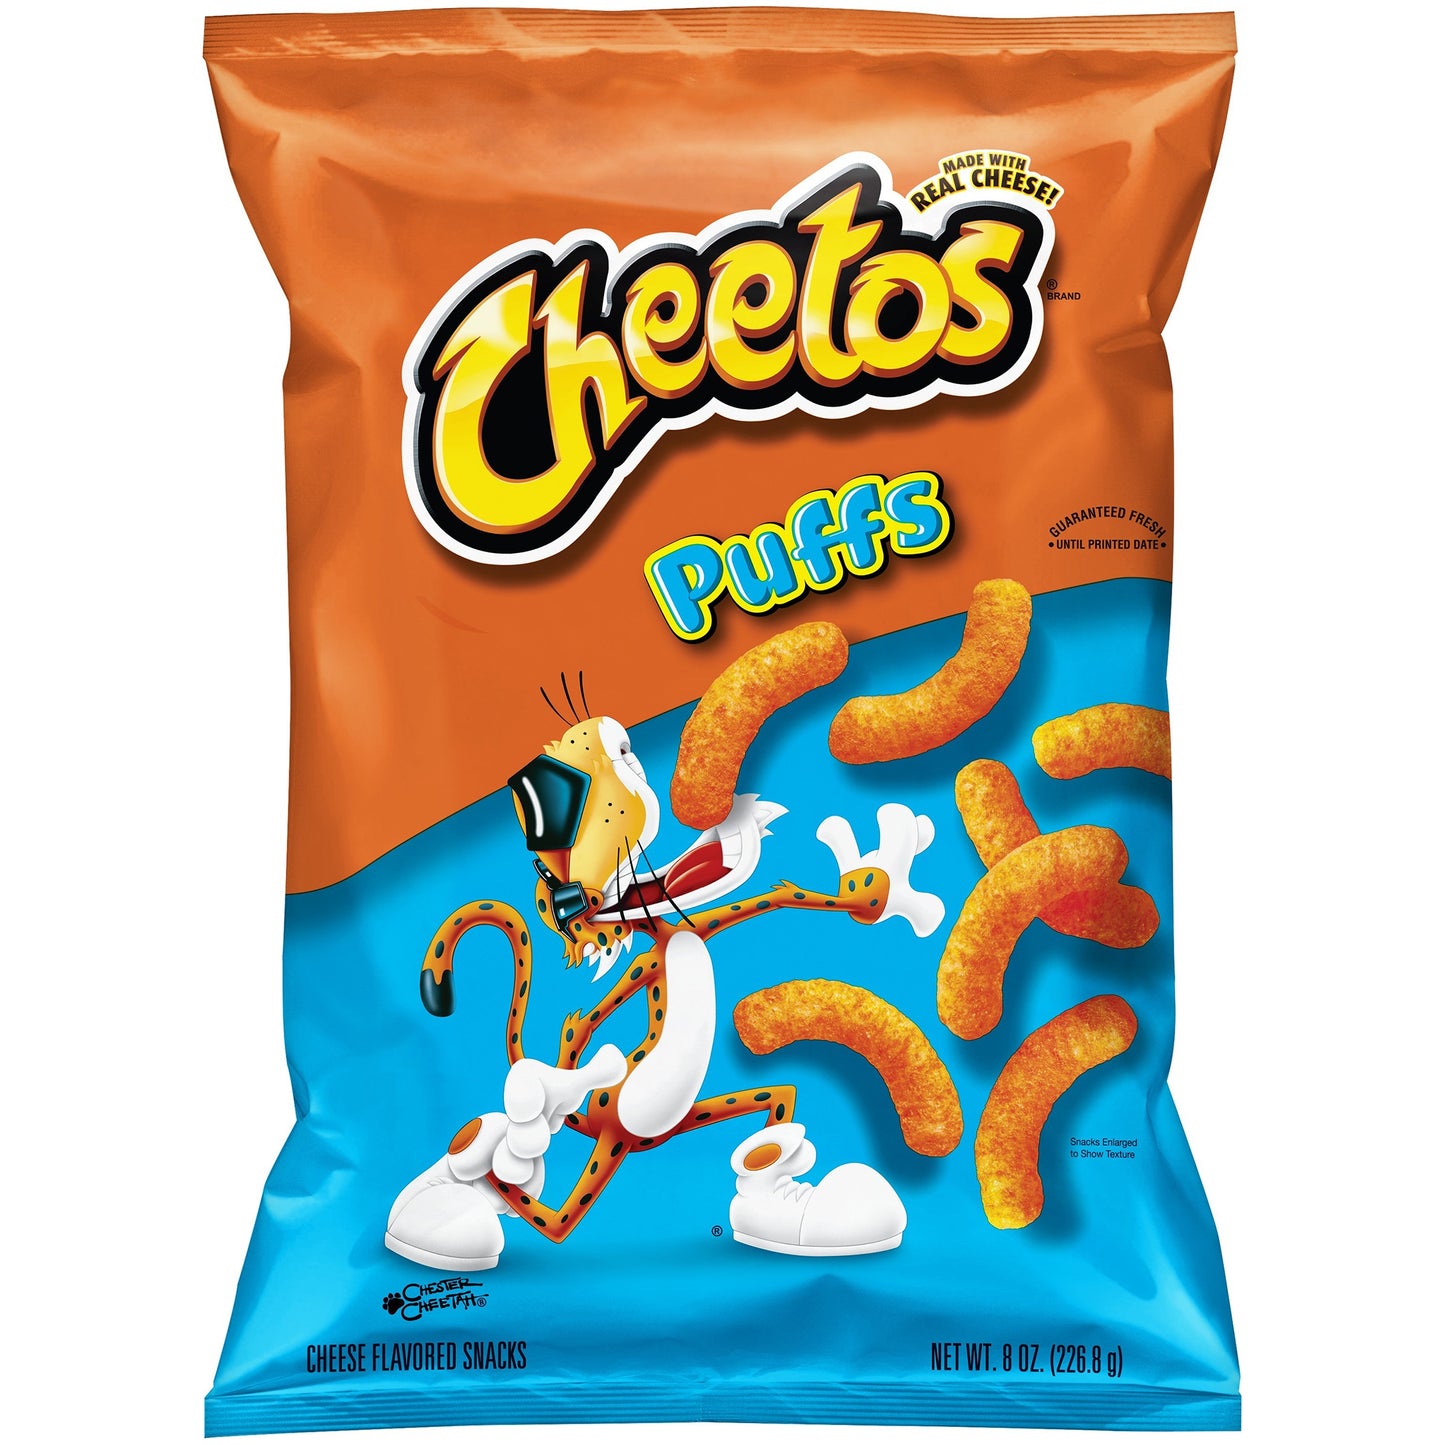 Cheetos Puff Cheese Flavored Snack, 8 oz